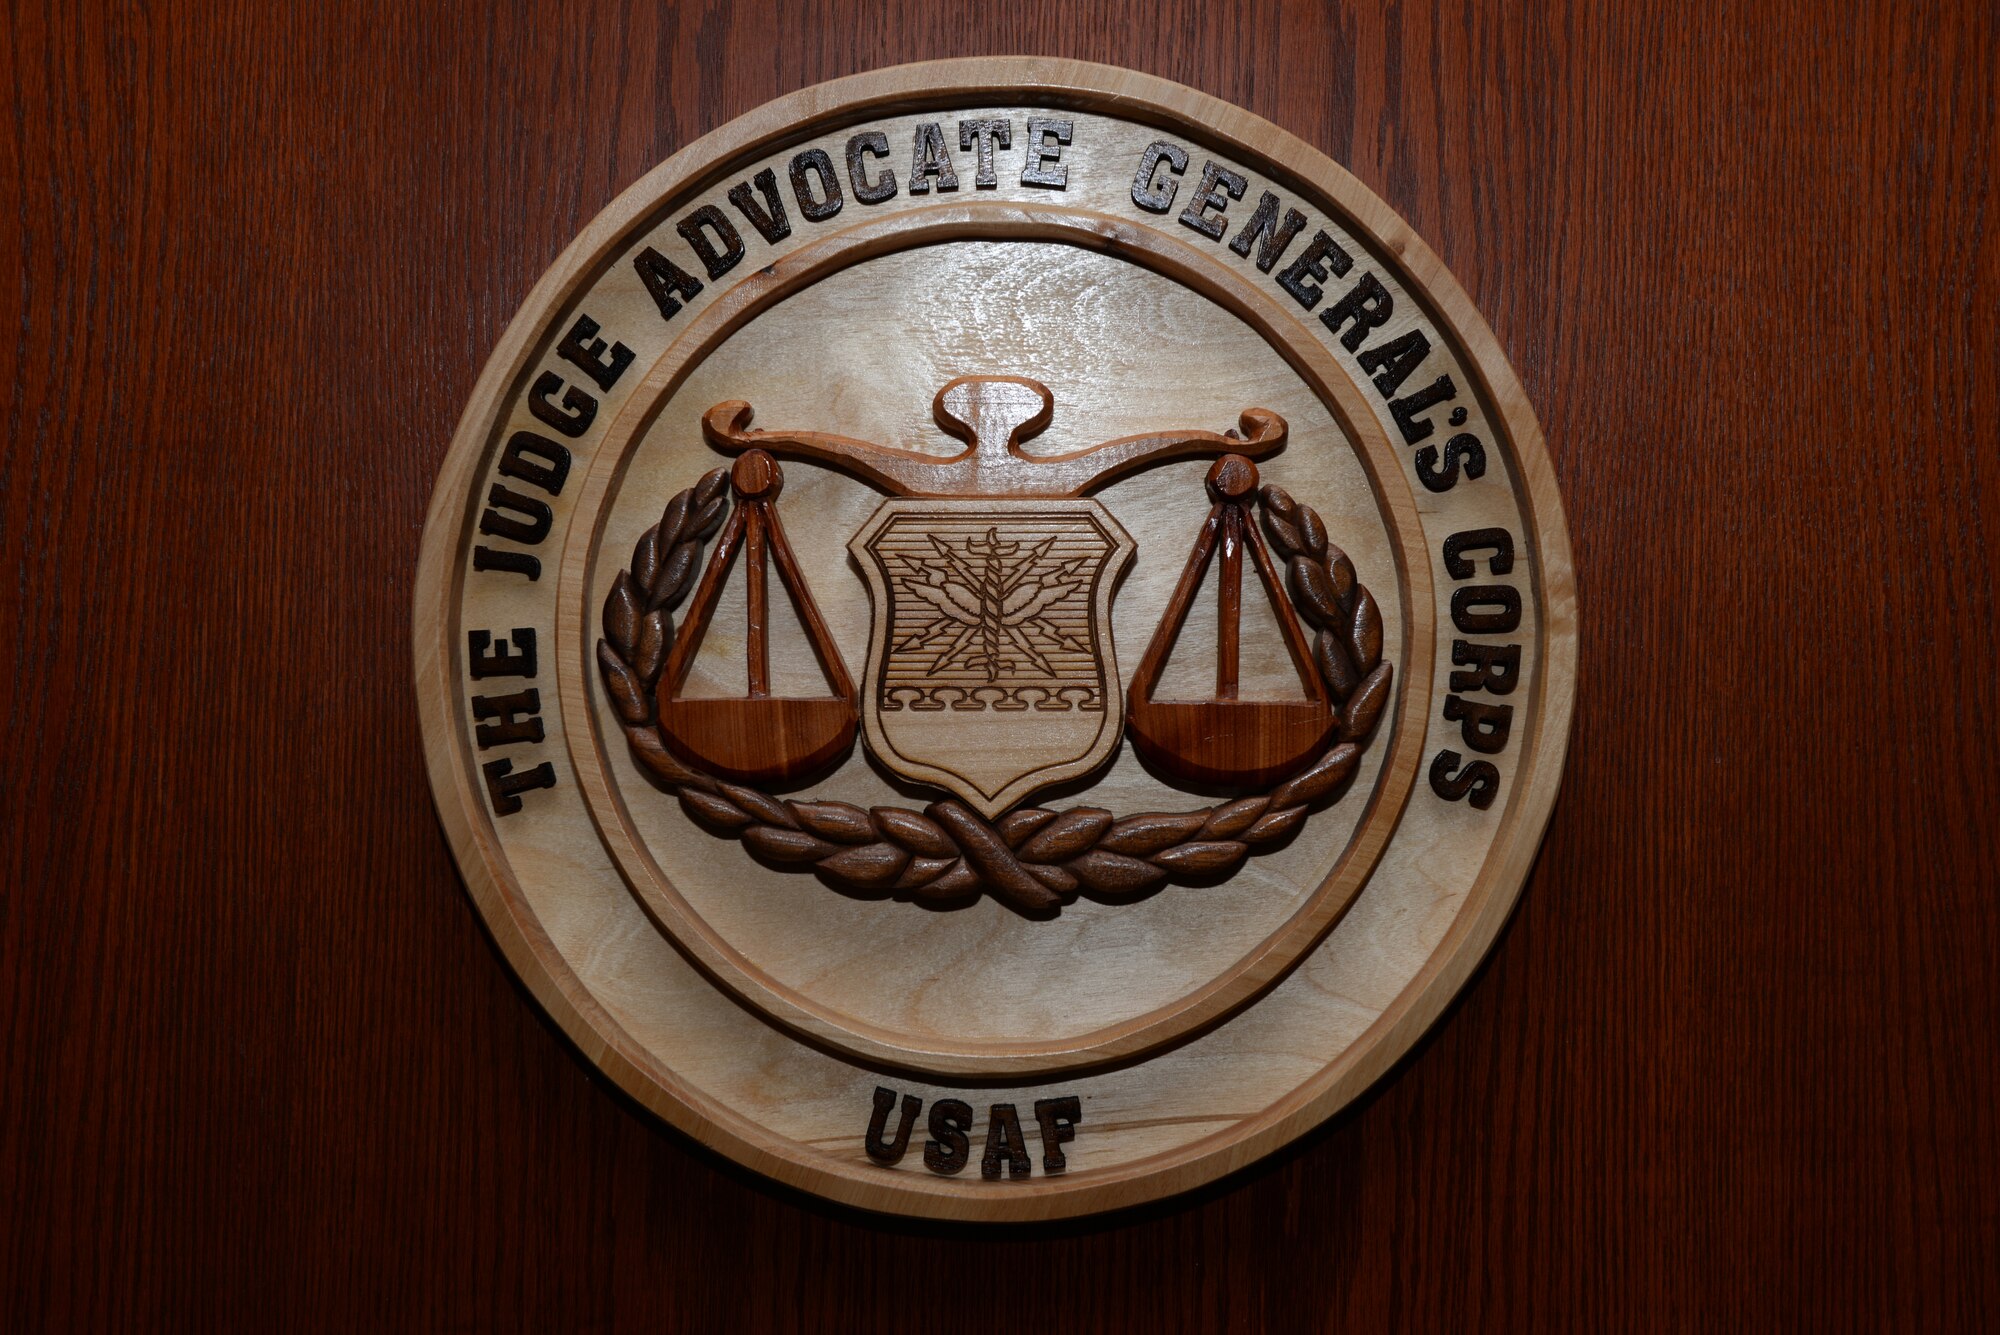 The seal of the Judge Advocate General Corps is displayed inside the 28th Bomb Wing courtroom at Ellsworth Air Force Base, S.D., July 17, 2018. The Ellsworth Judge Advocate office serves as the legal advisor for the 28th Bomb Wing. They handle issues including administrative law, government contracting and military law. (U.S. Air Force photo by Airman 1st Class Nicolas Z. Erwin)